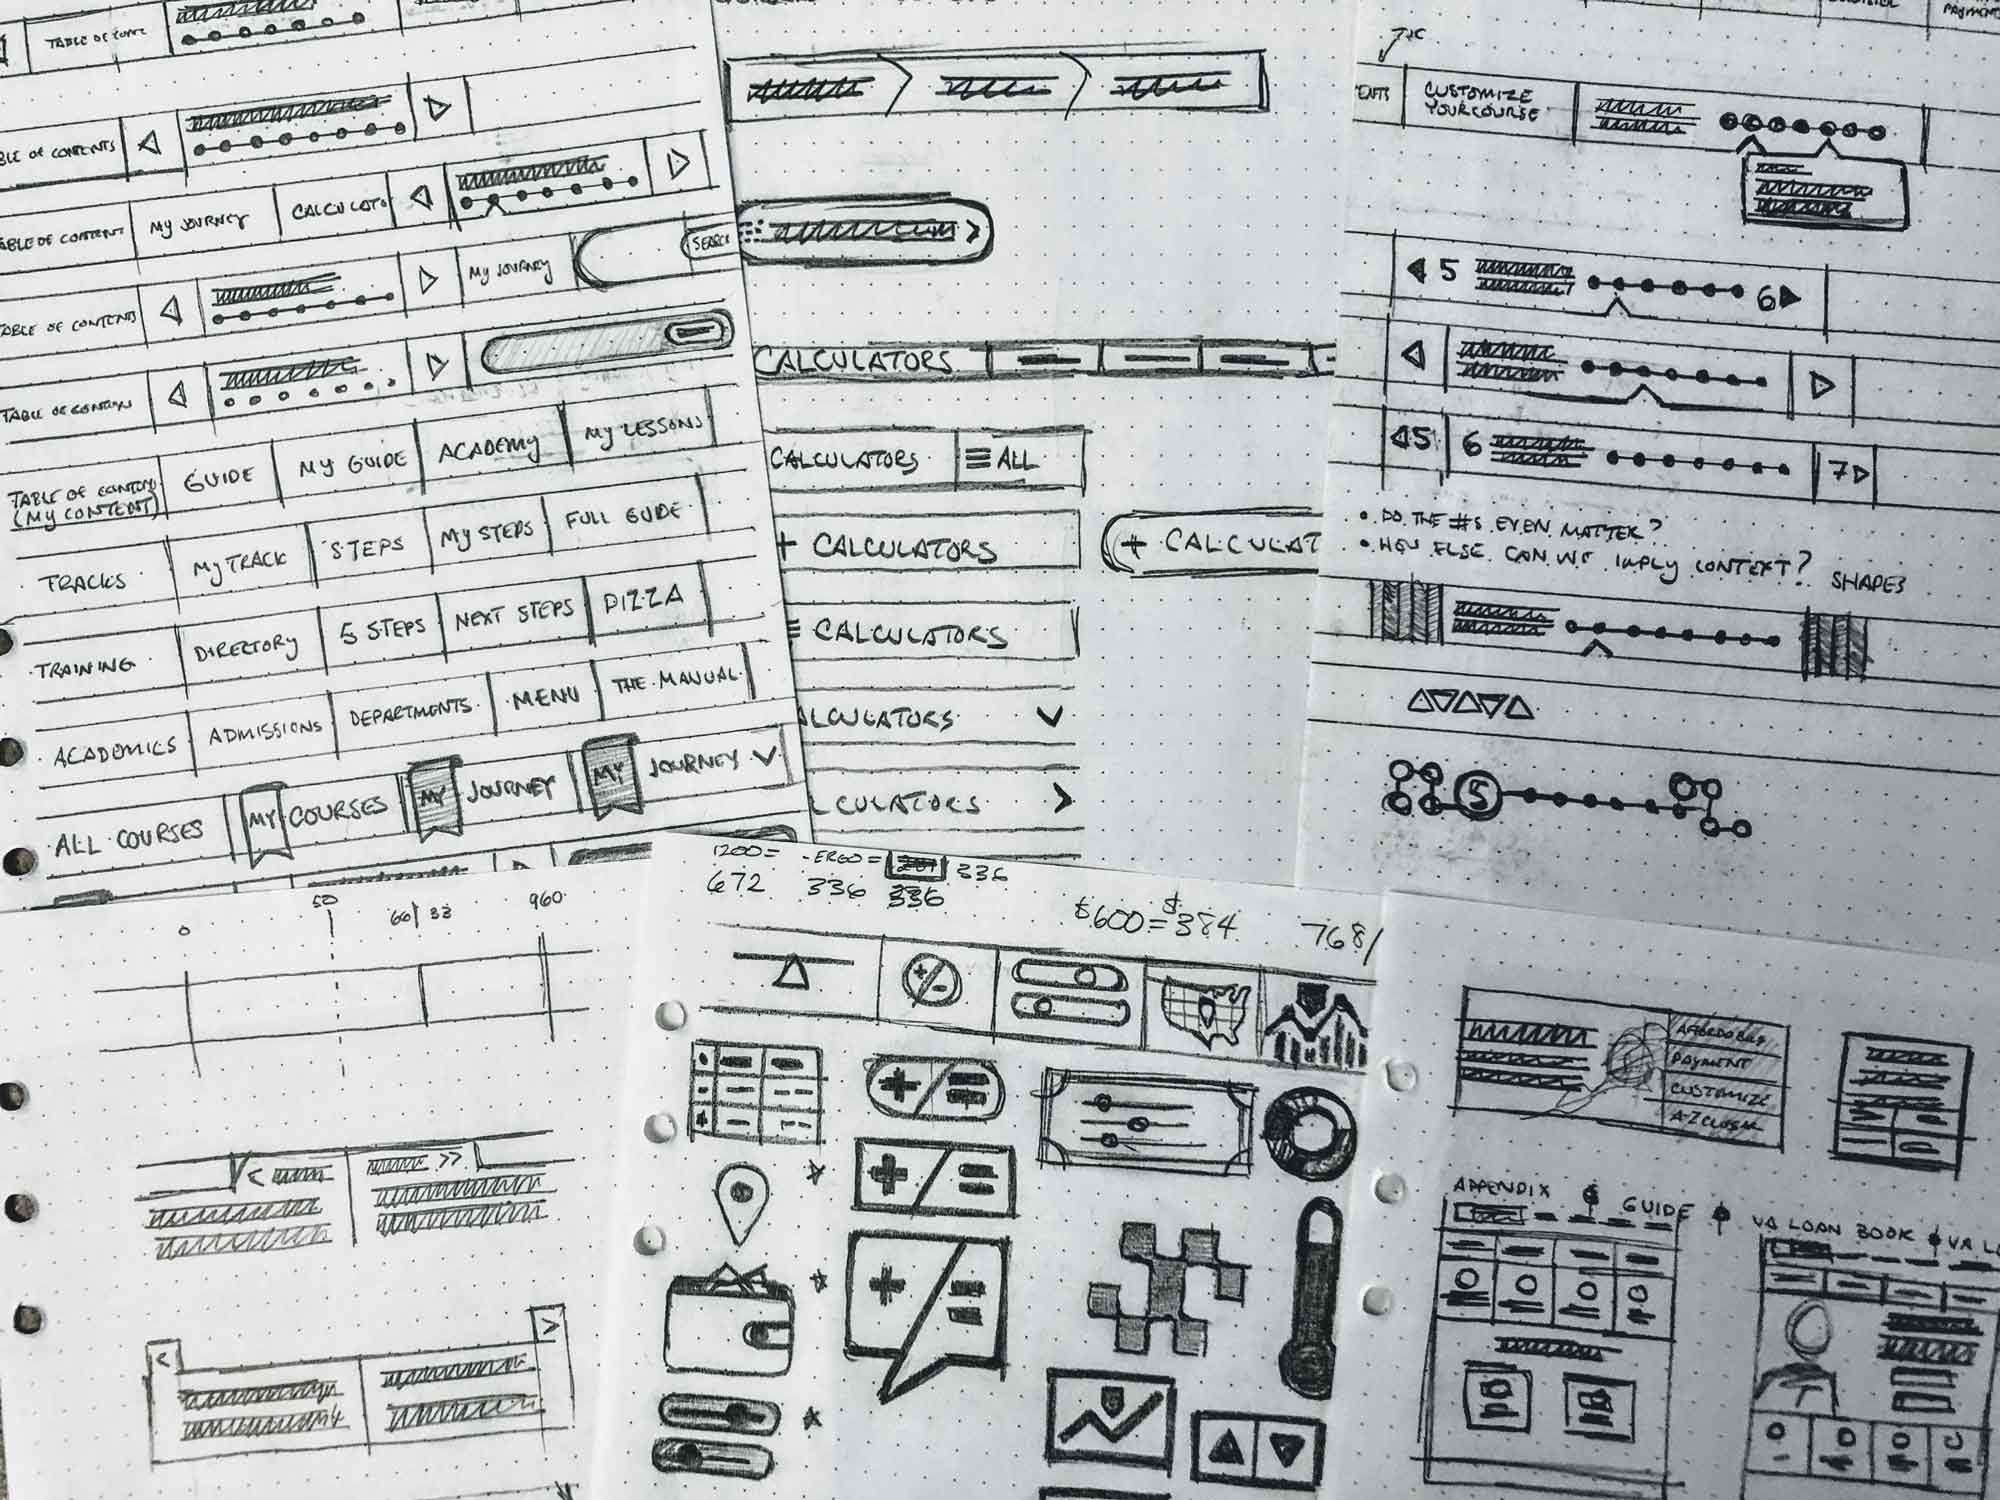 UI sketches on grid paper